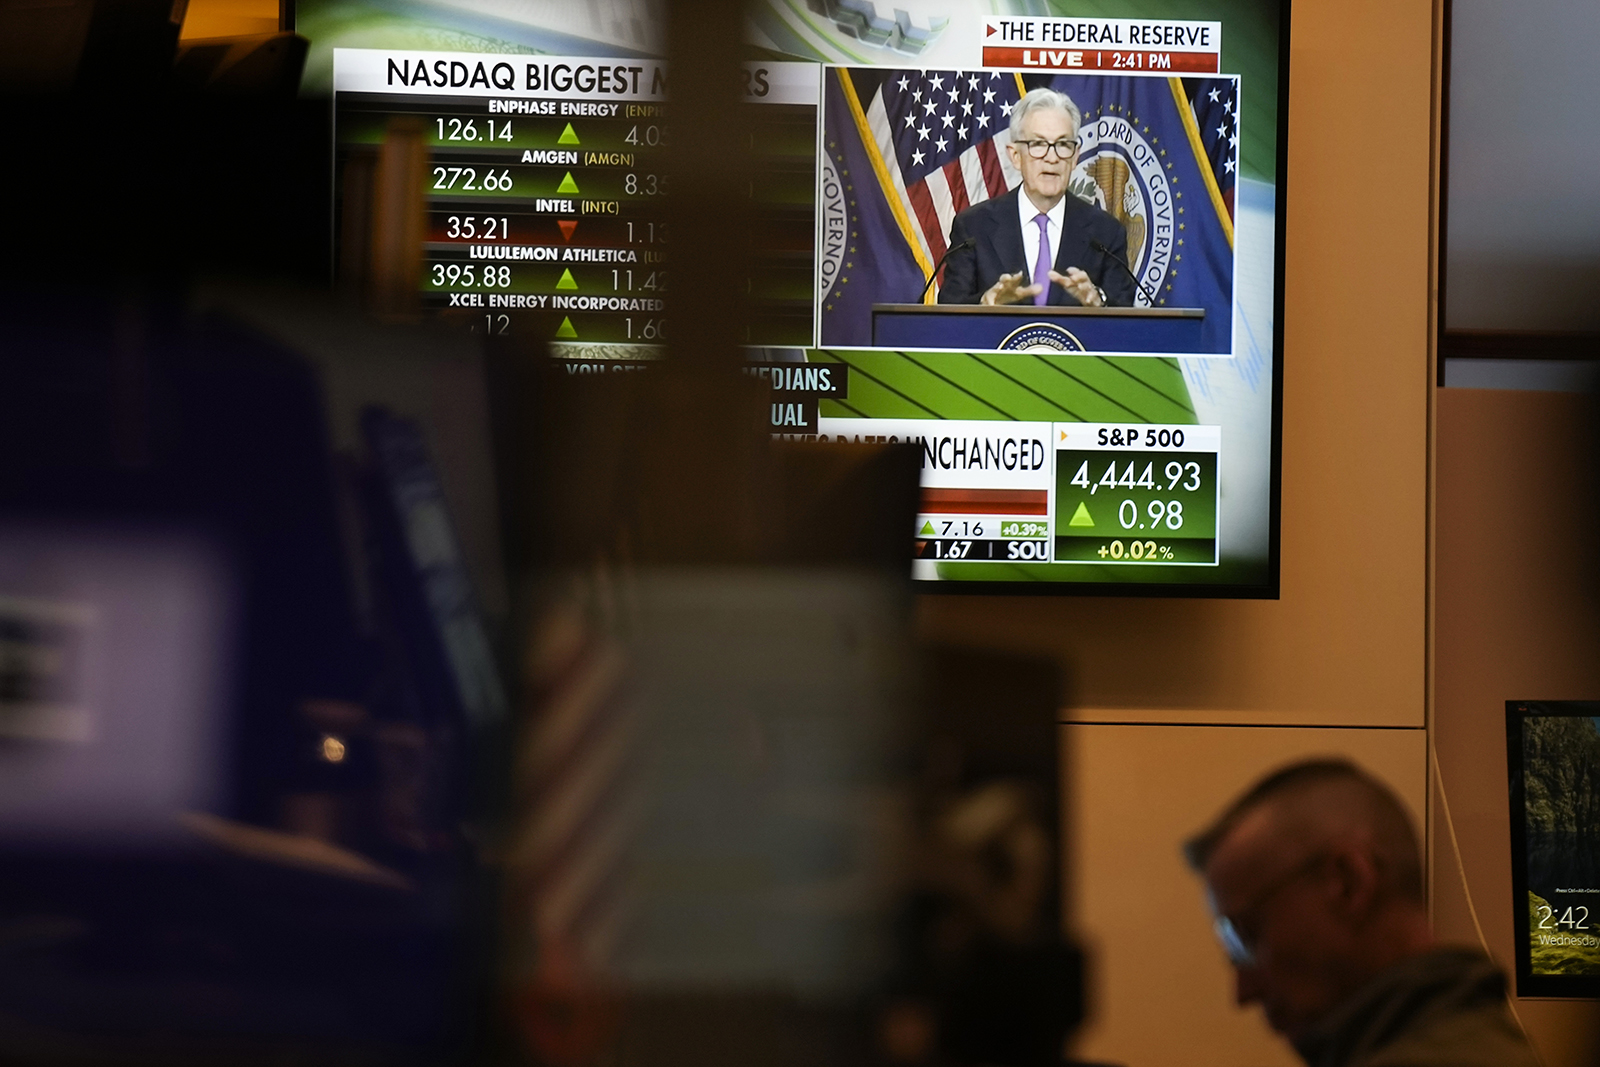 A press conference by Federal Reserve chairman Jerome Powell is displayed at the New York Stock Exchange today.